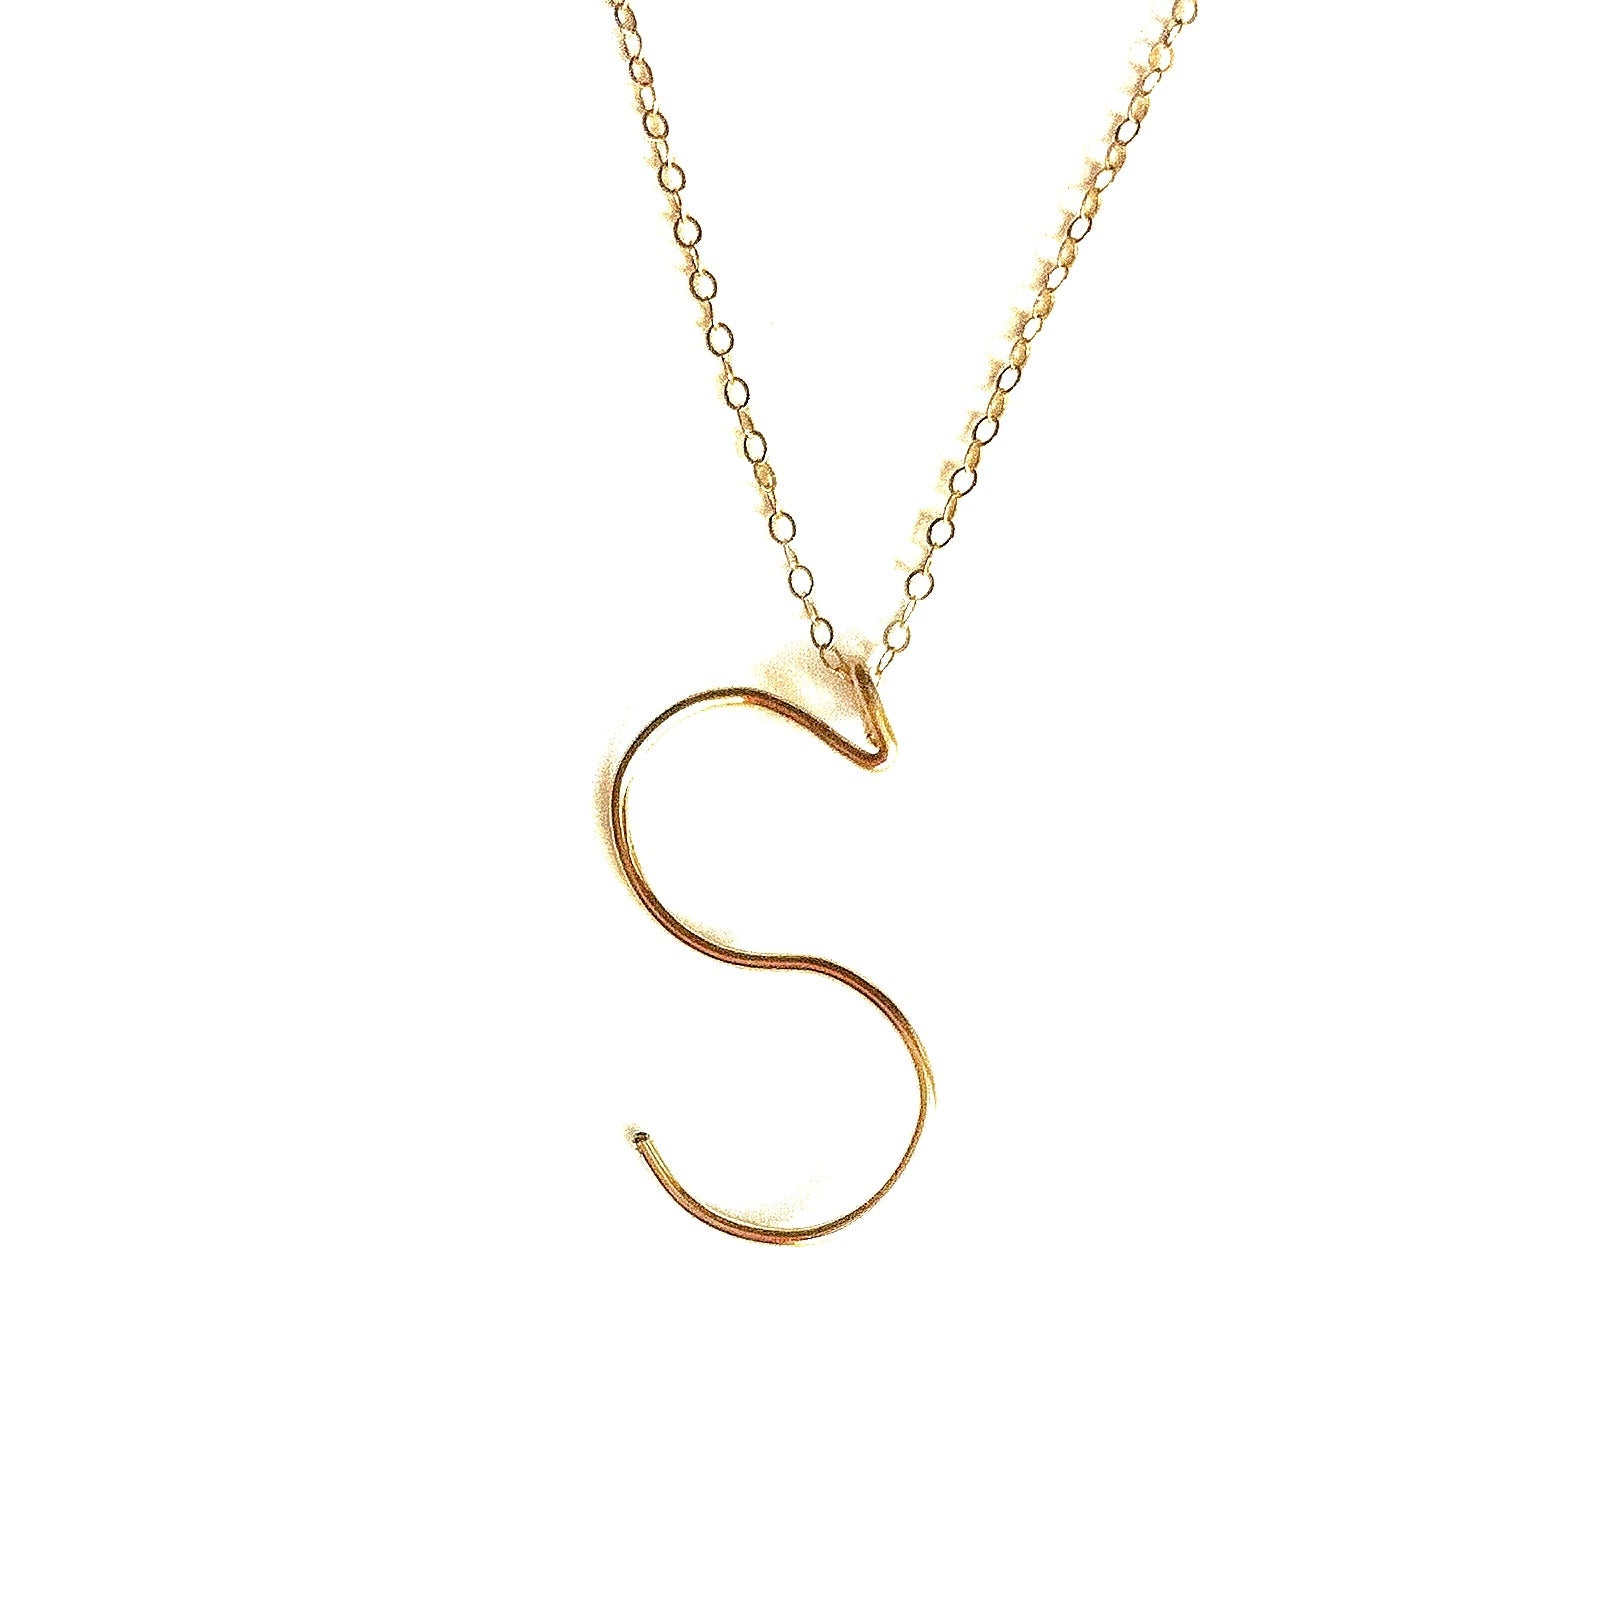 Handmade Initial Necklace Robyn Canady s 14K Gold Filled 